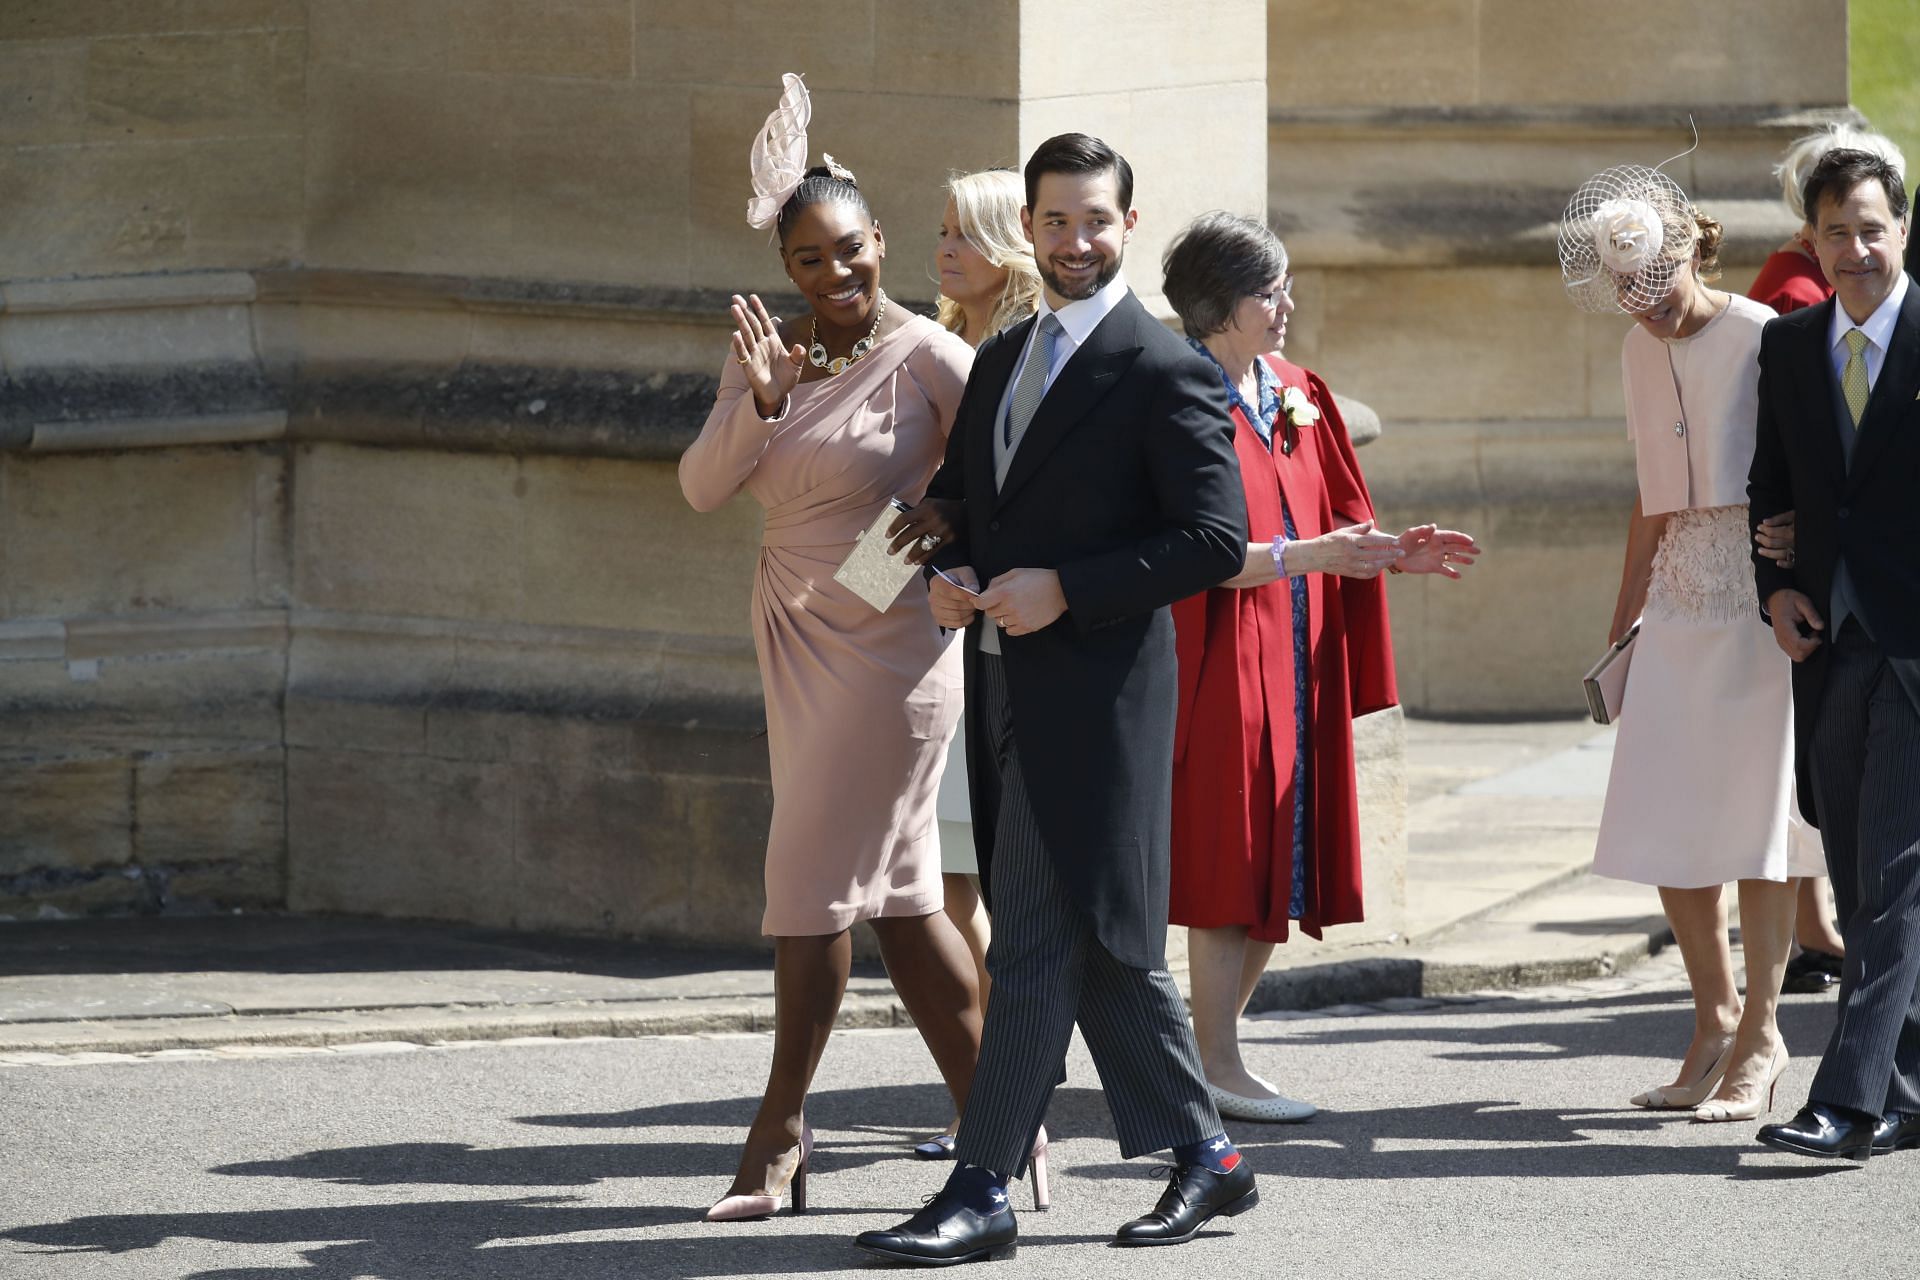 Enter Serena Williams and Alexis Ohanian at the Windsor Castlecaption